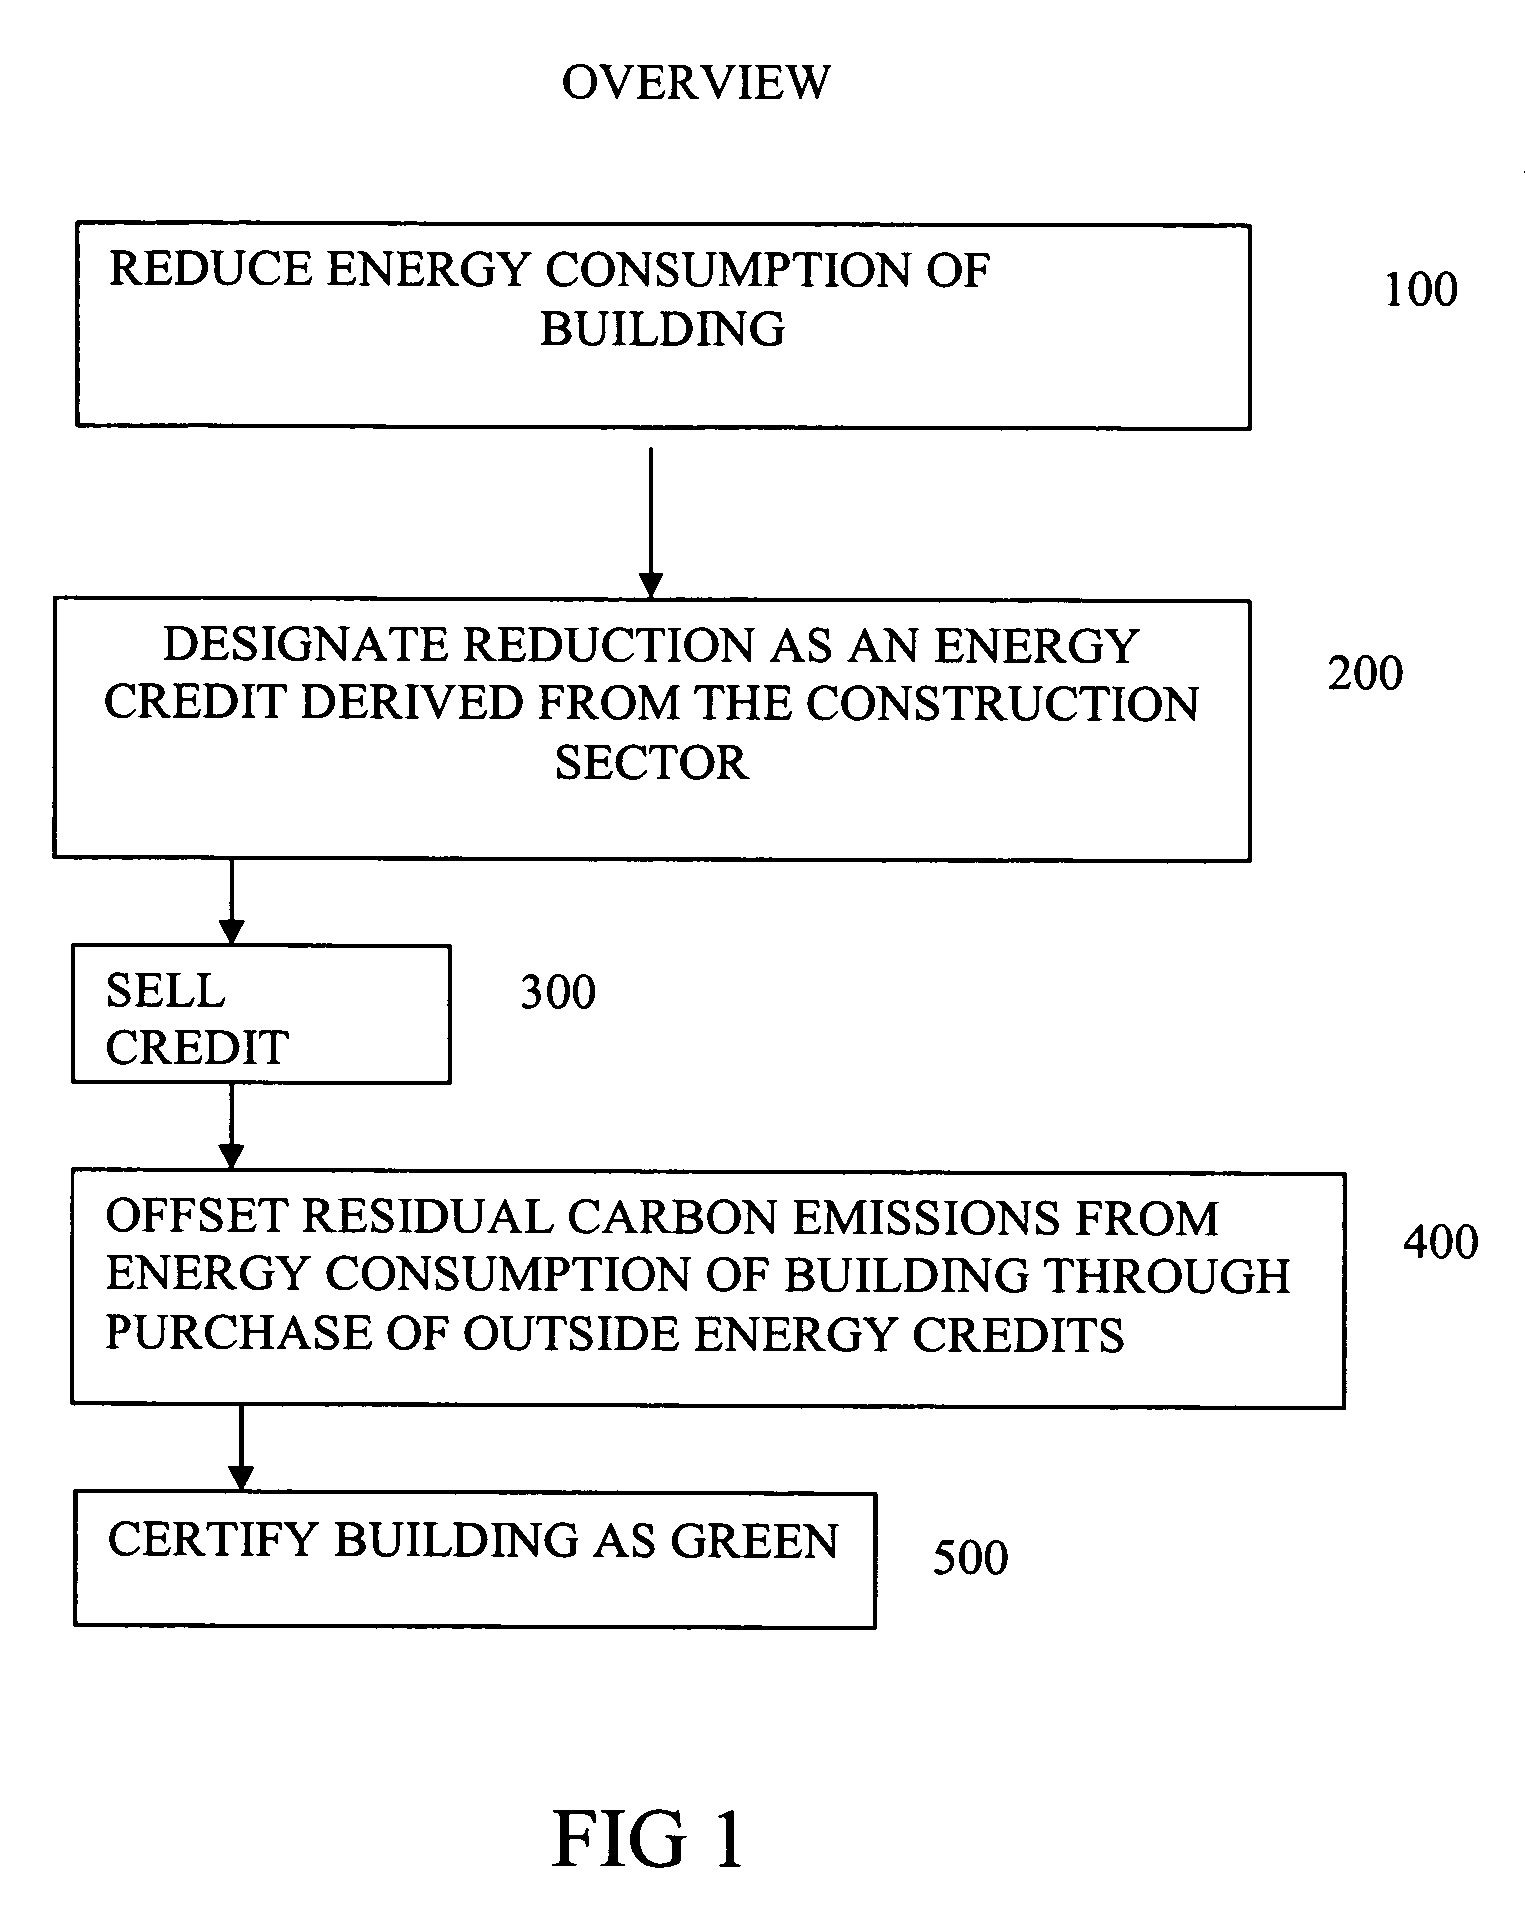 System and method for creating and using energy credits derived from the construction industry while maintaining green certificateion